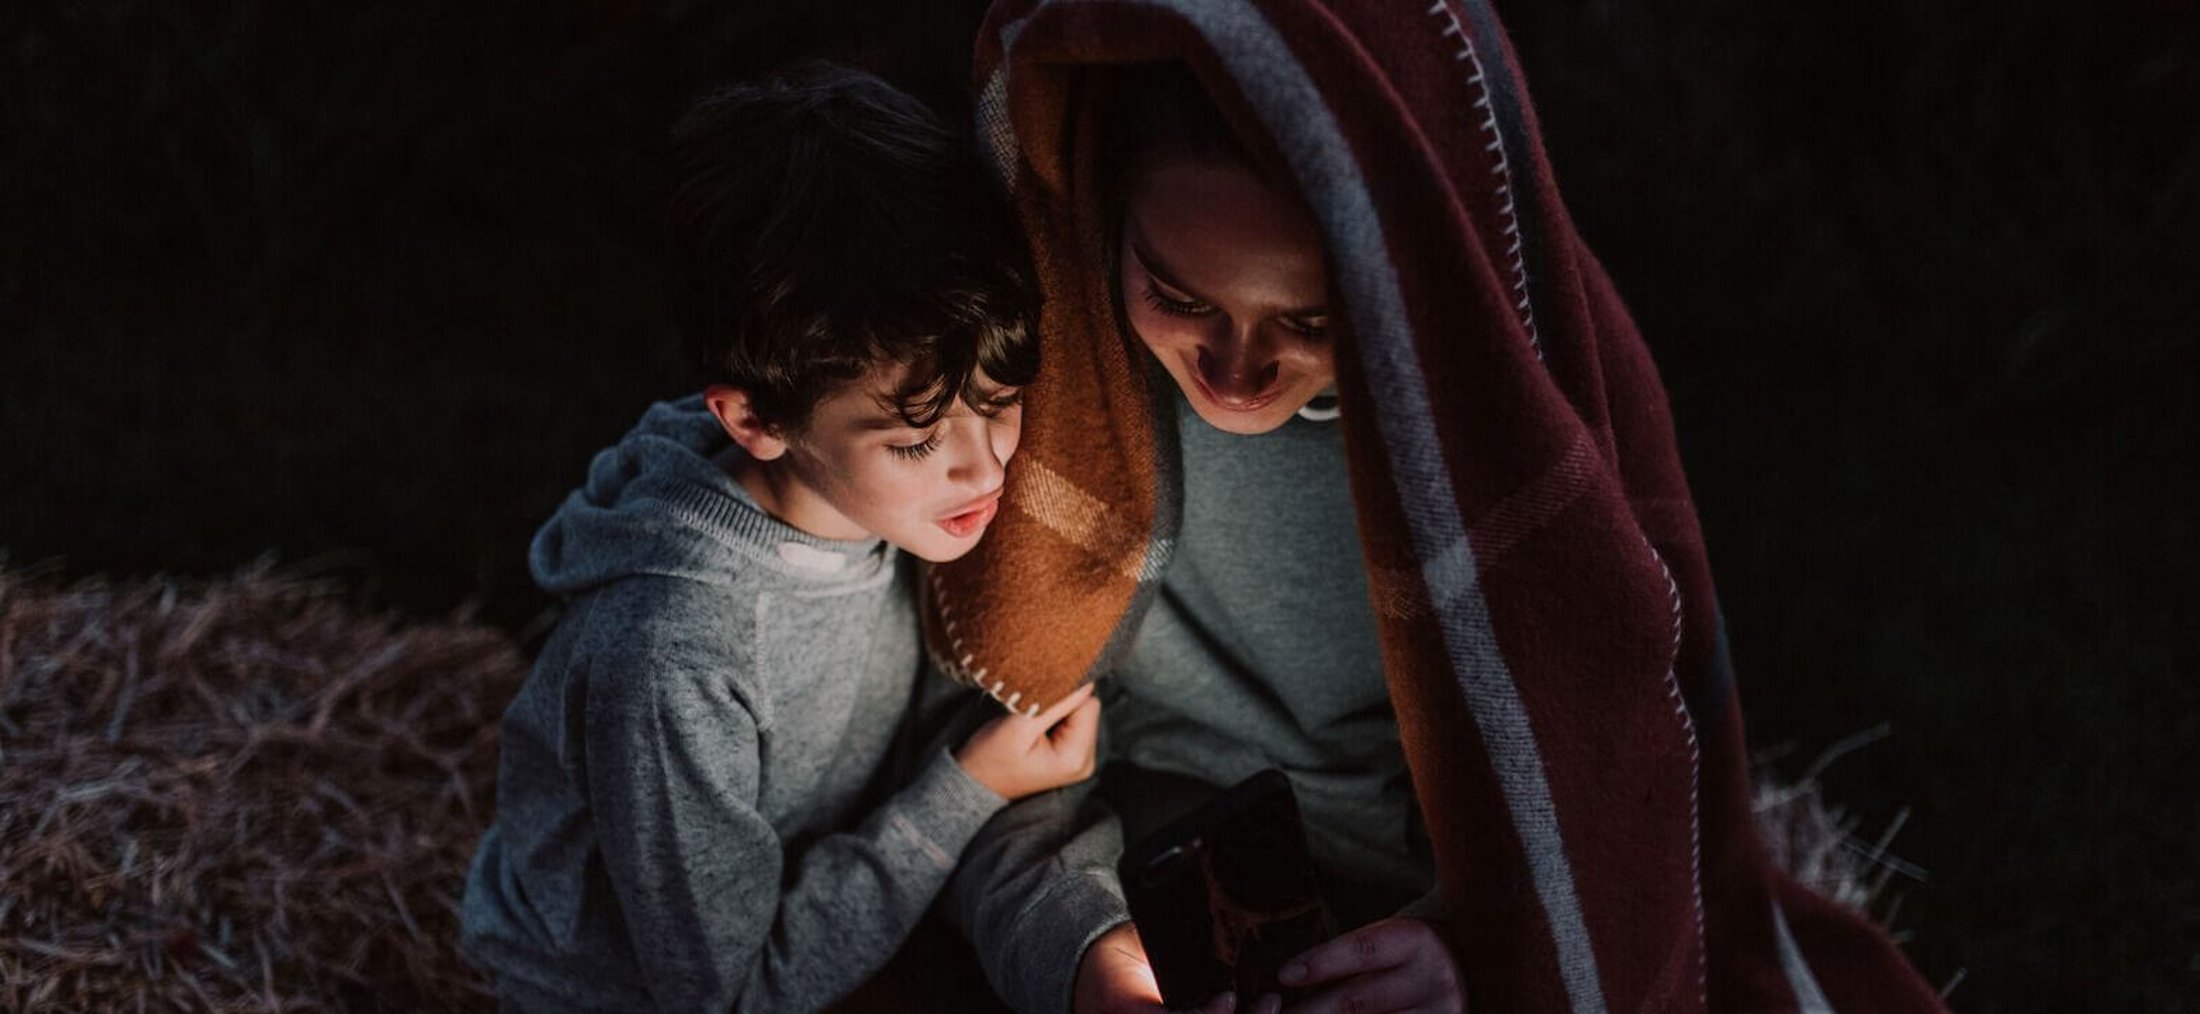 Image of a woman and a child looking at a glowing device screen at night